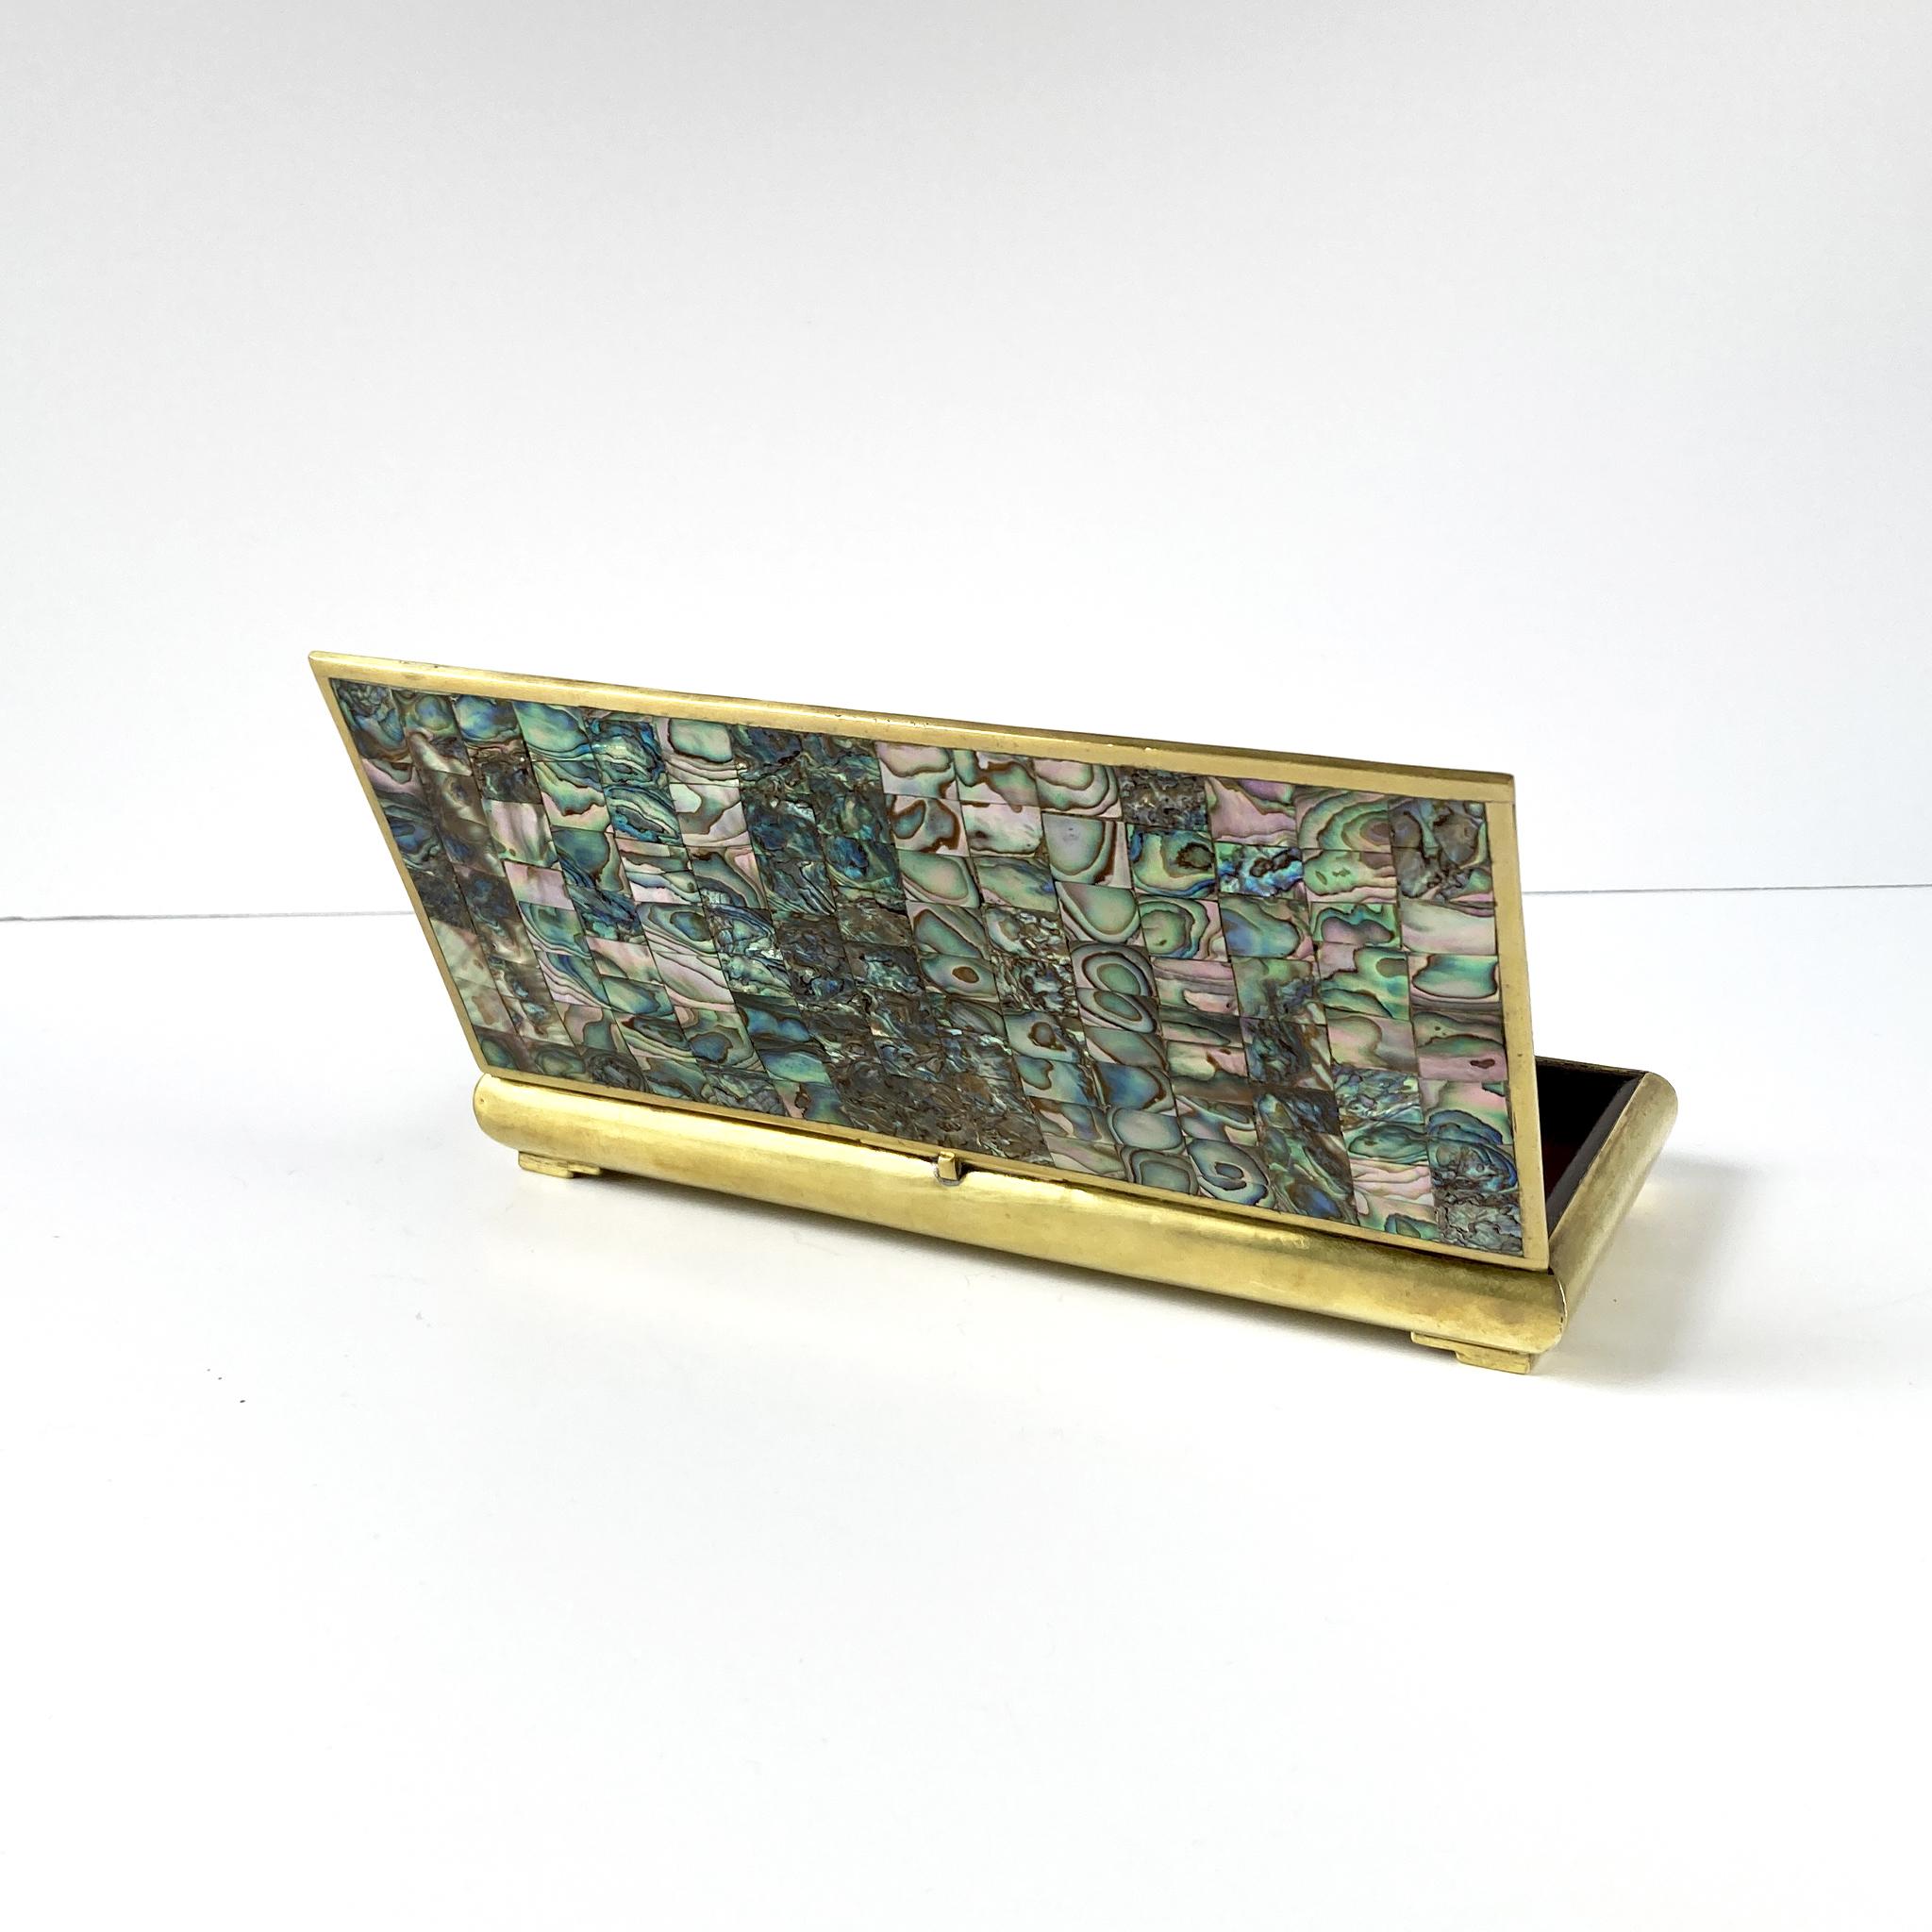 Unknown Midcentury Hinged Abalone Shell and Brass Box, Mosaic Pattern on Lid, Wood-lined For Sale